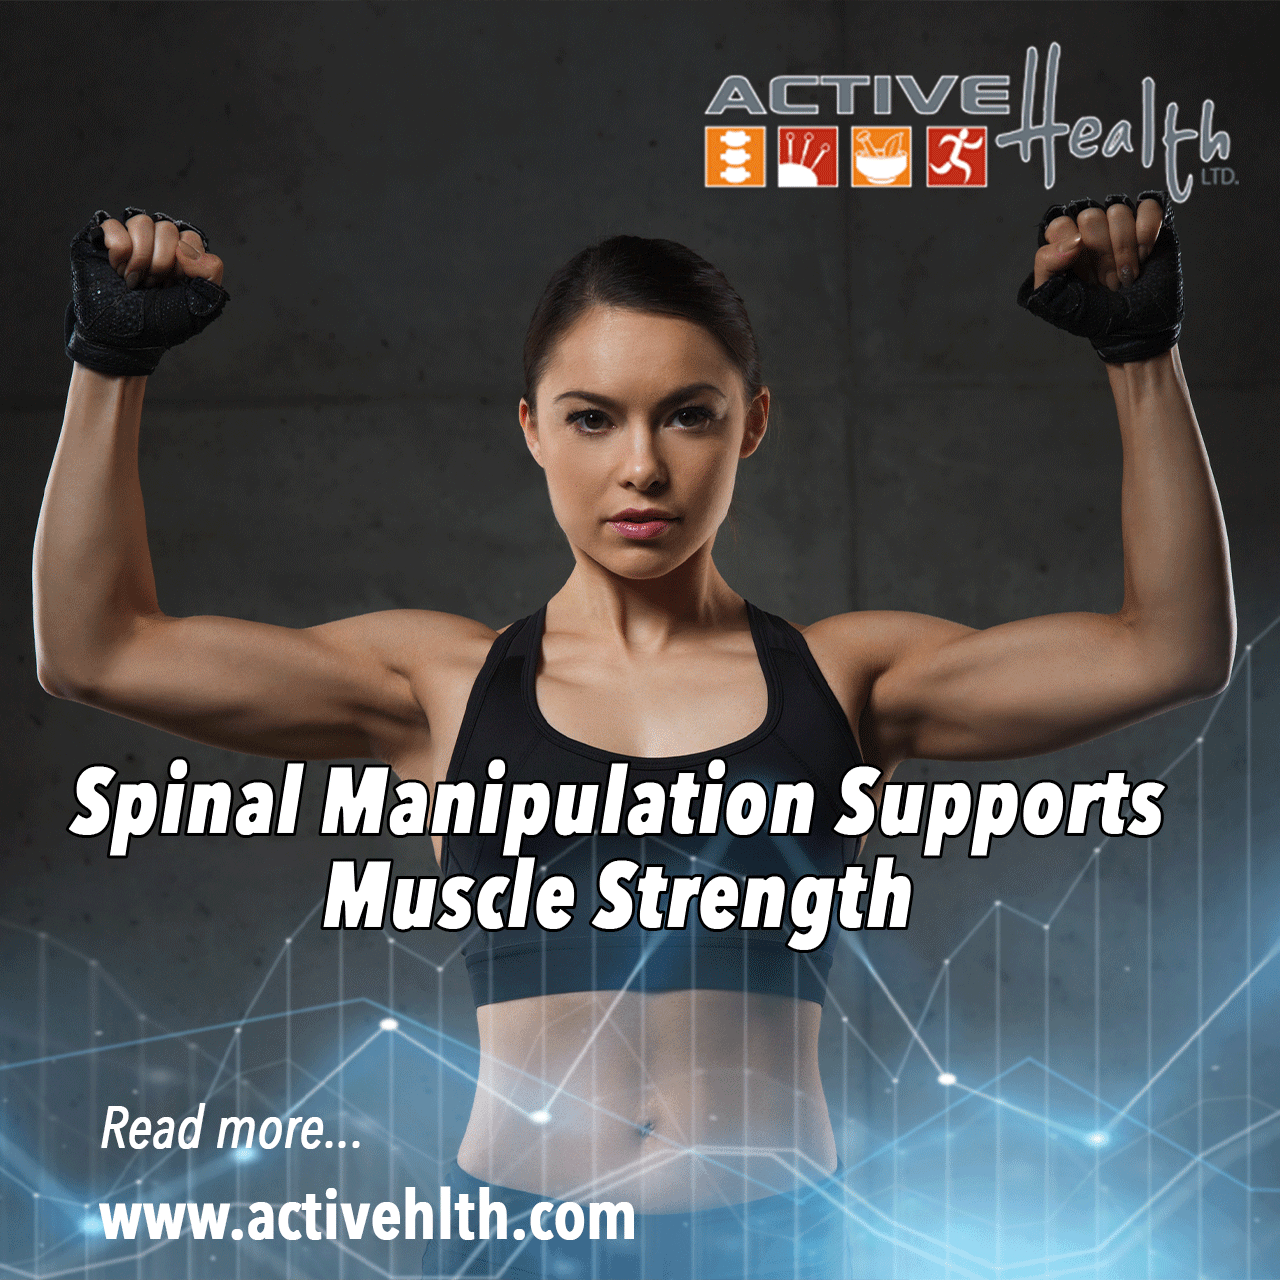 Spinal Manipulation supports Muscle Strength